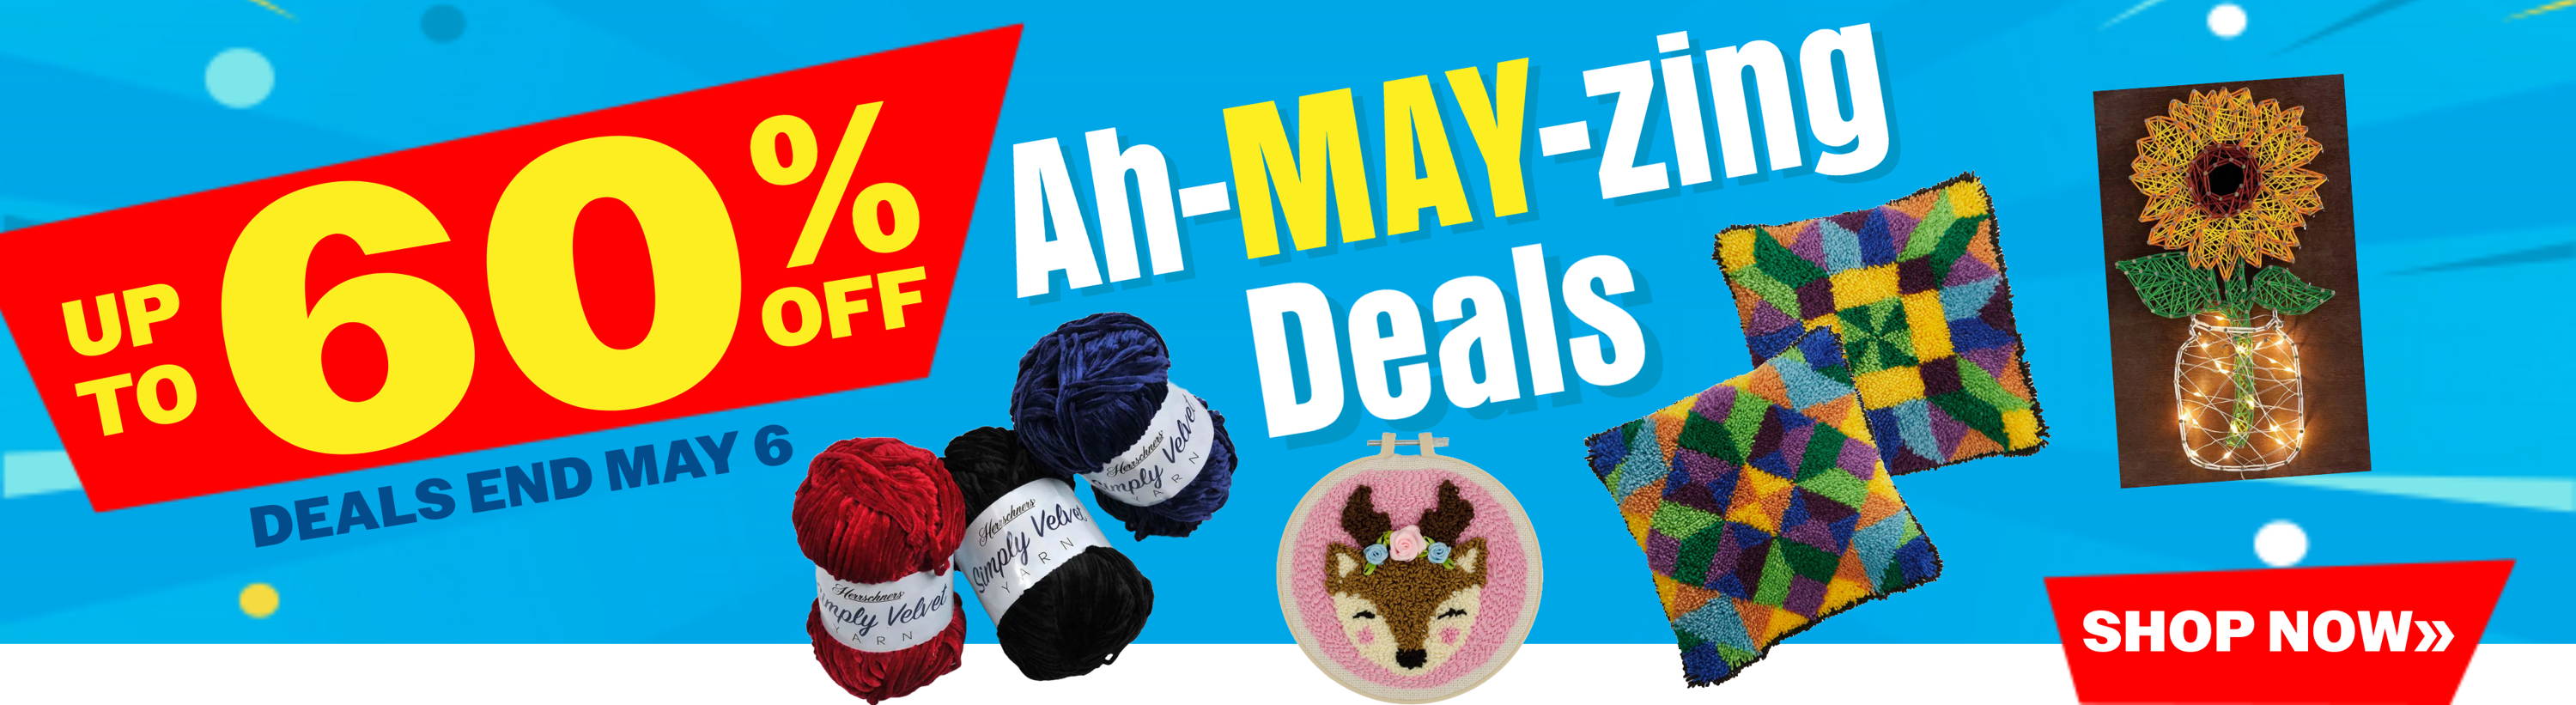 Ah-MAY-Zing Deals up to 60% Off until May 6. Image: Featured Sale Items.